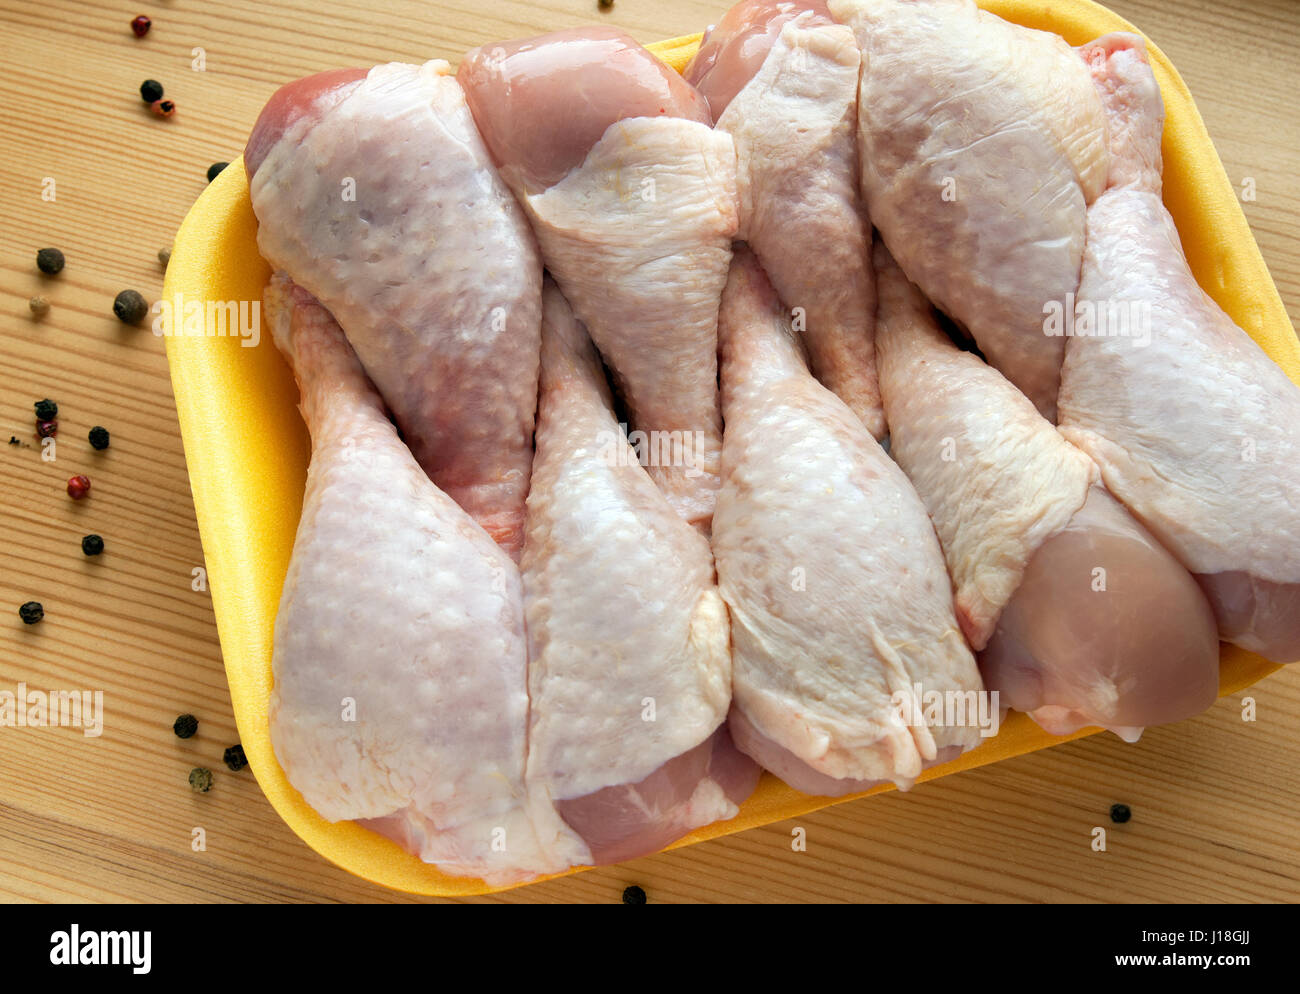 Download Chicken Legs In The Yellow Tray On A Wooden Surface Stock Photo Alamy Yellowimages Mockups